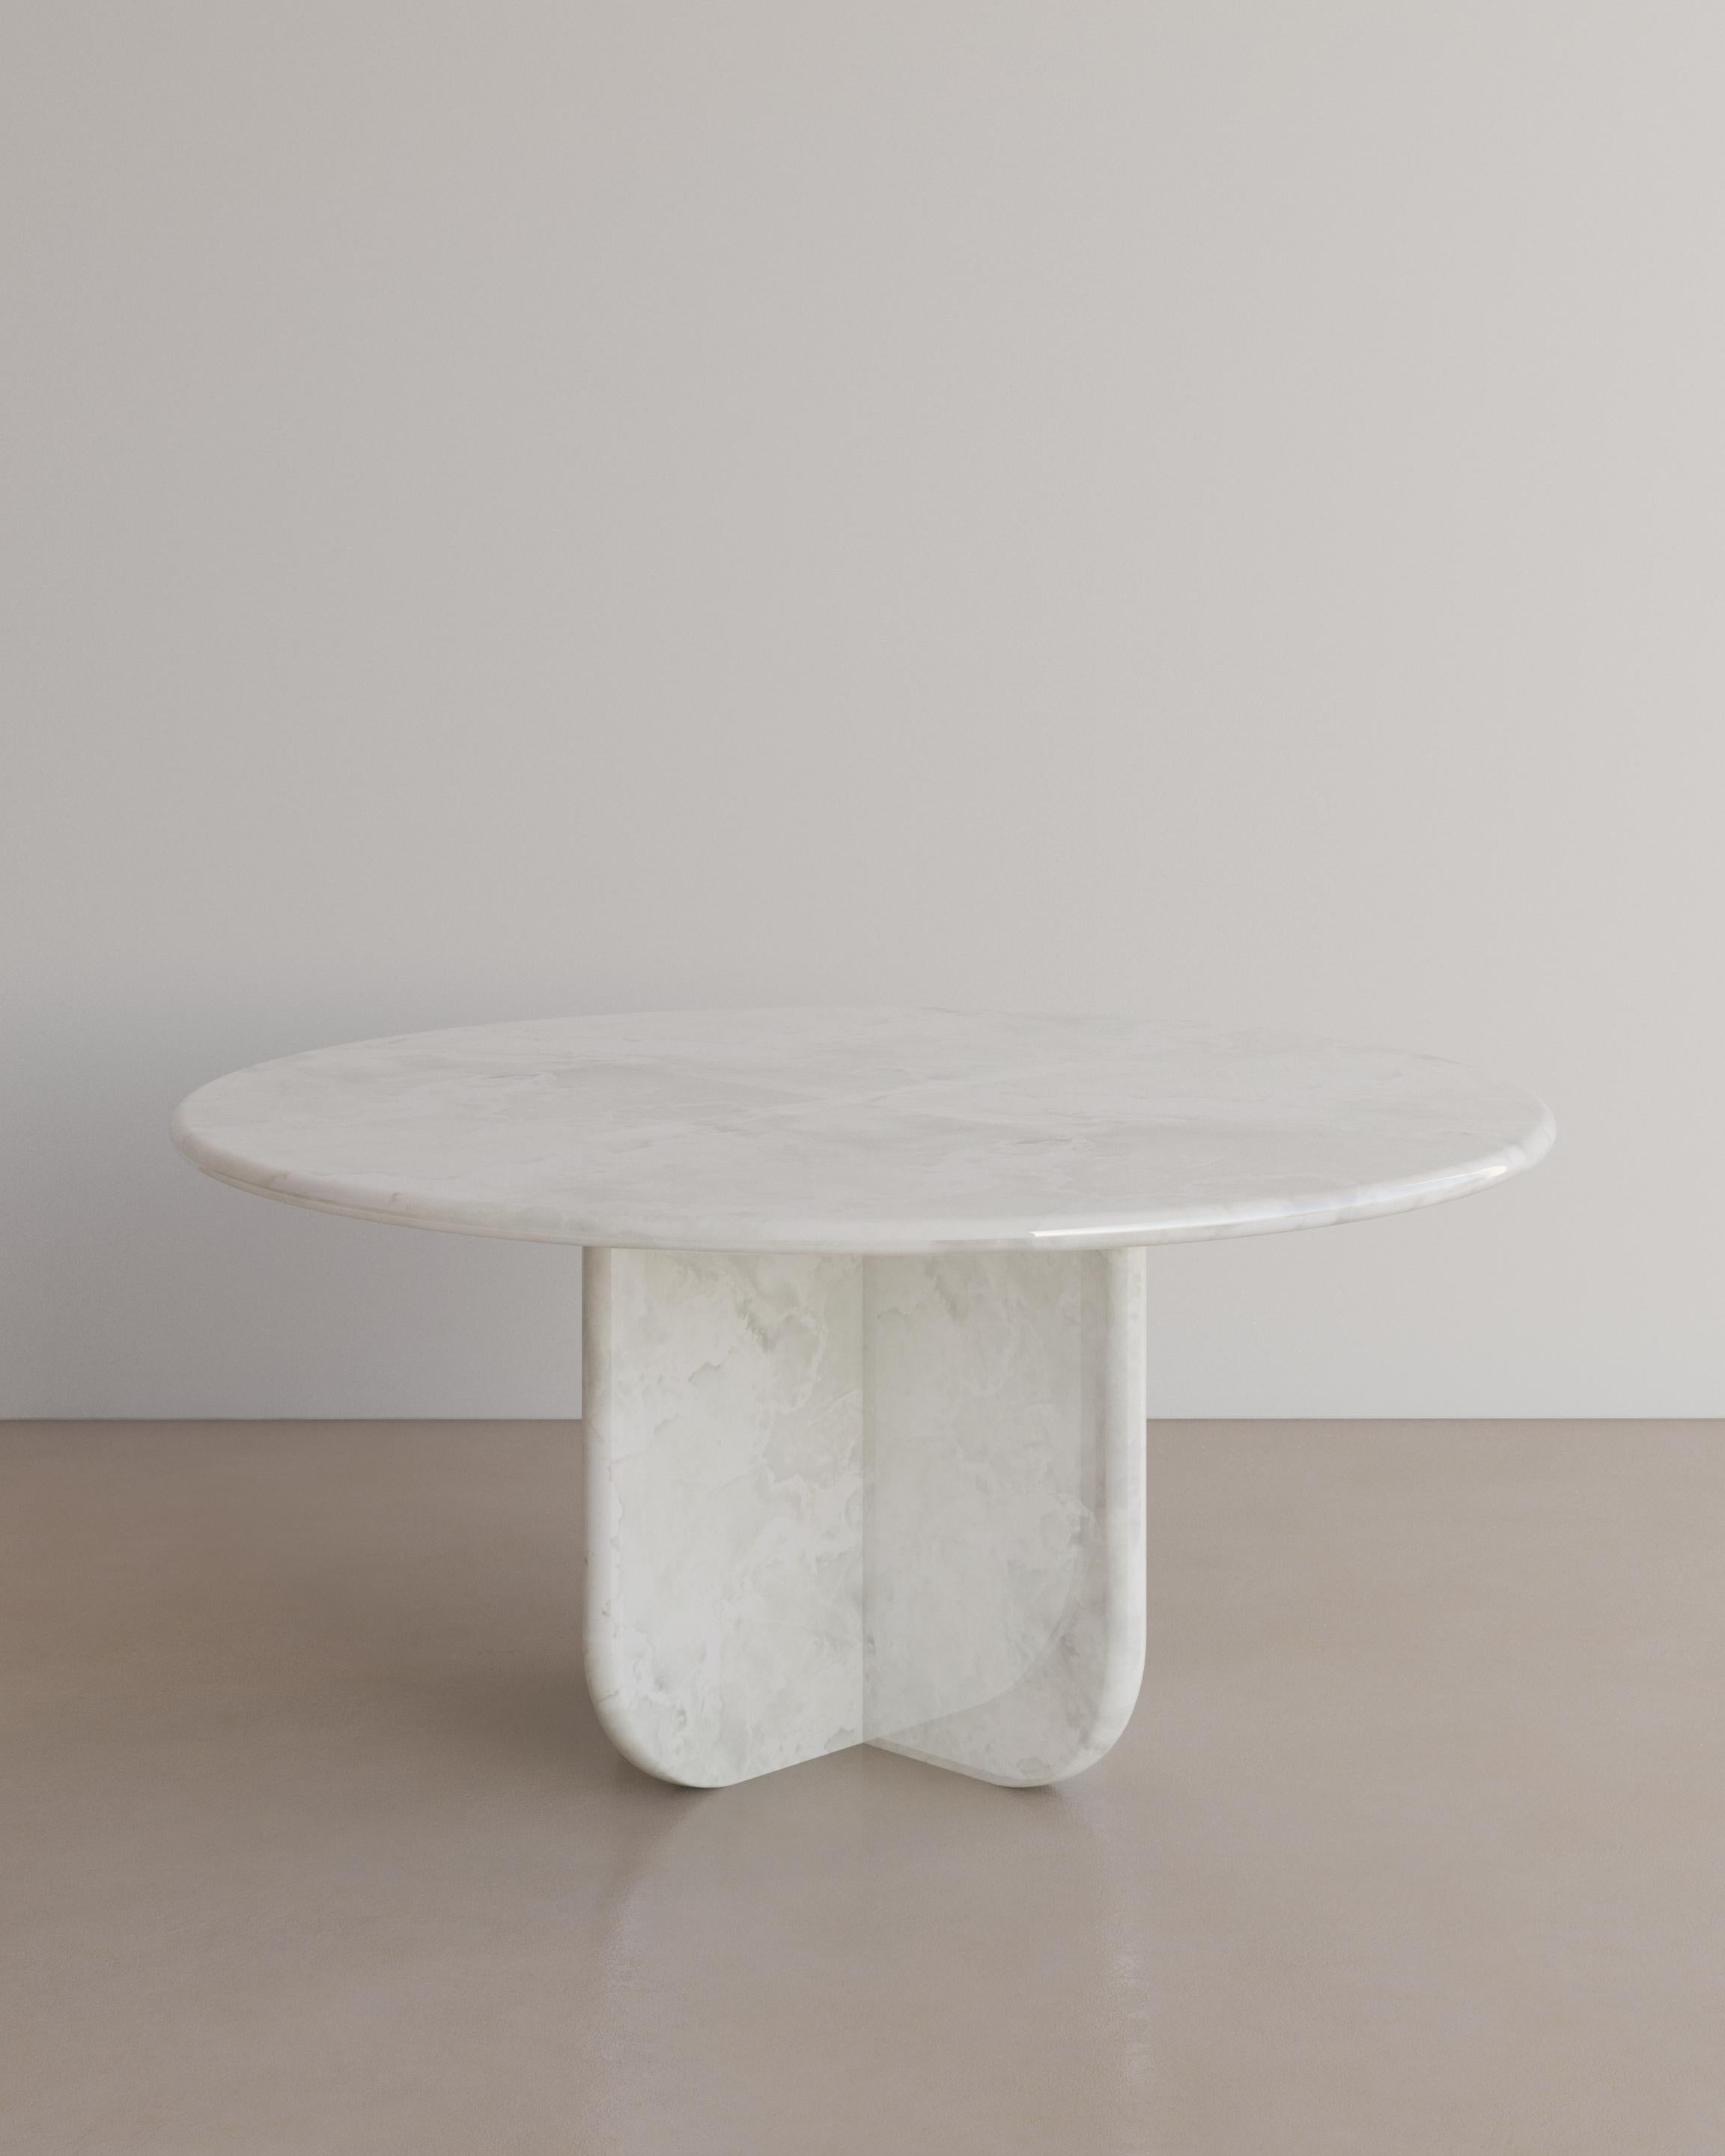 The Essentialist presents the Ètoile dining table I. A bold rounded circle effortlessly stacks upon a four point star. Smooth planes exonerate beautiful natural patterning, forging a statement of minimalism that embodies the spirit of The